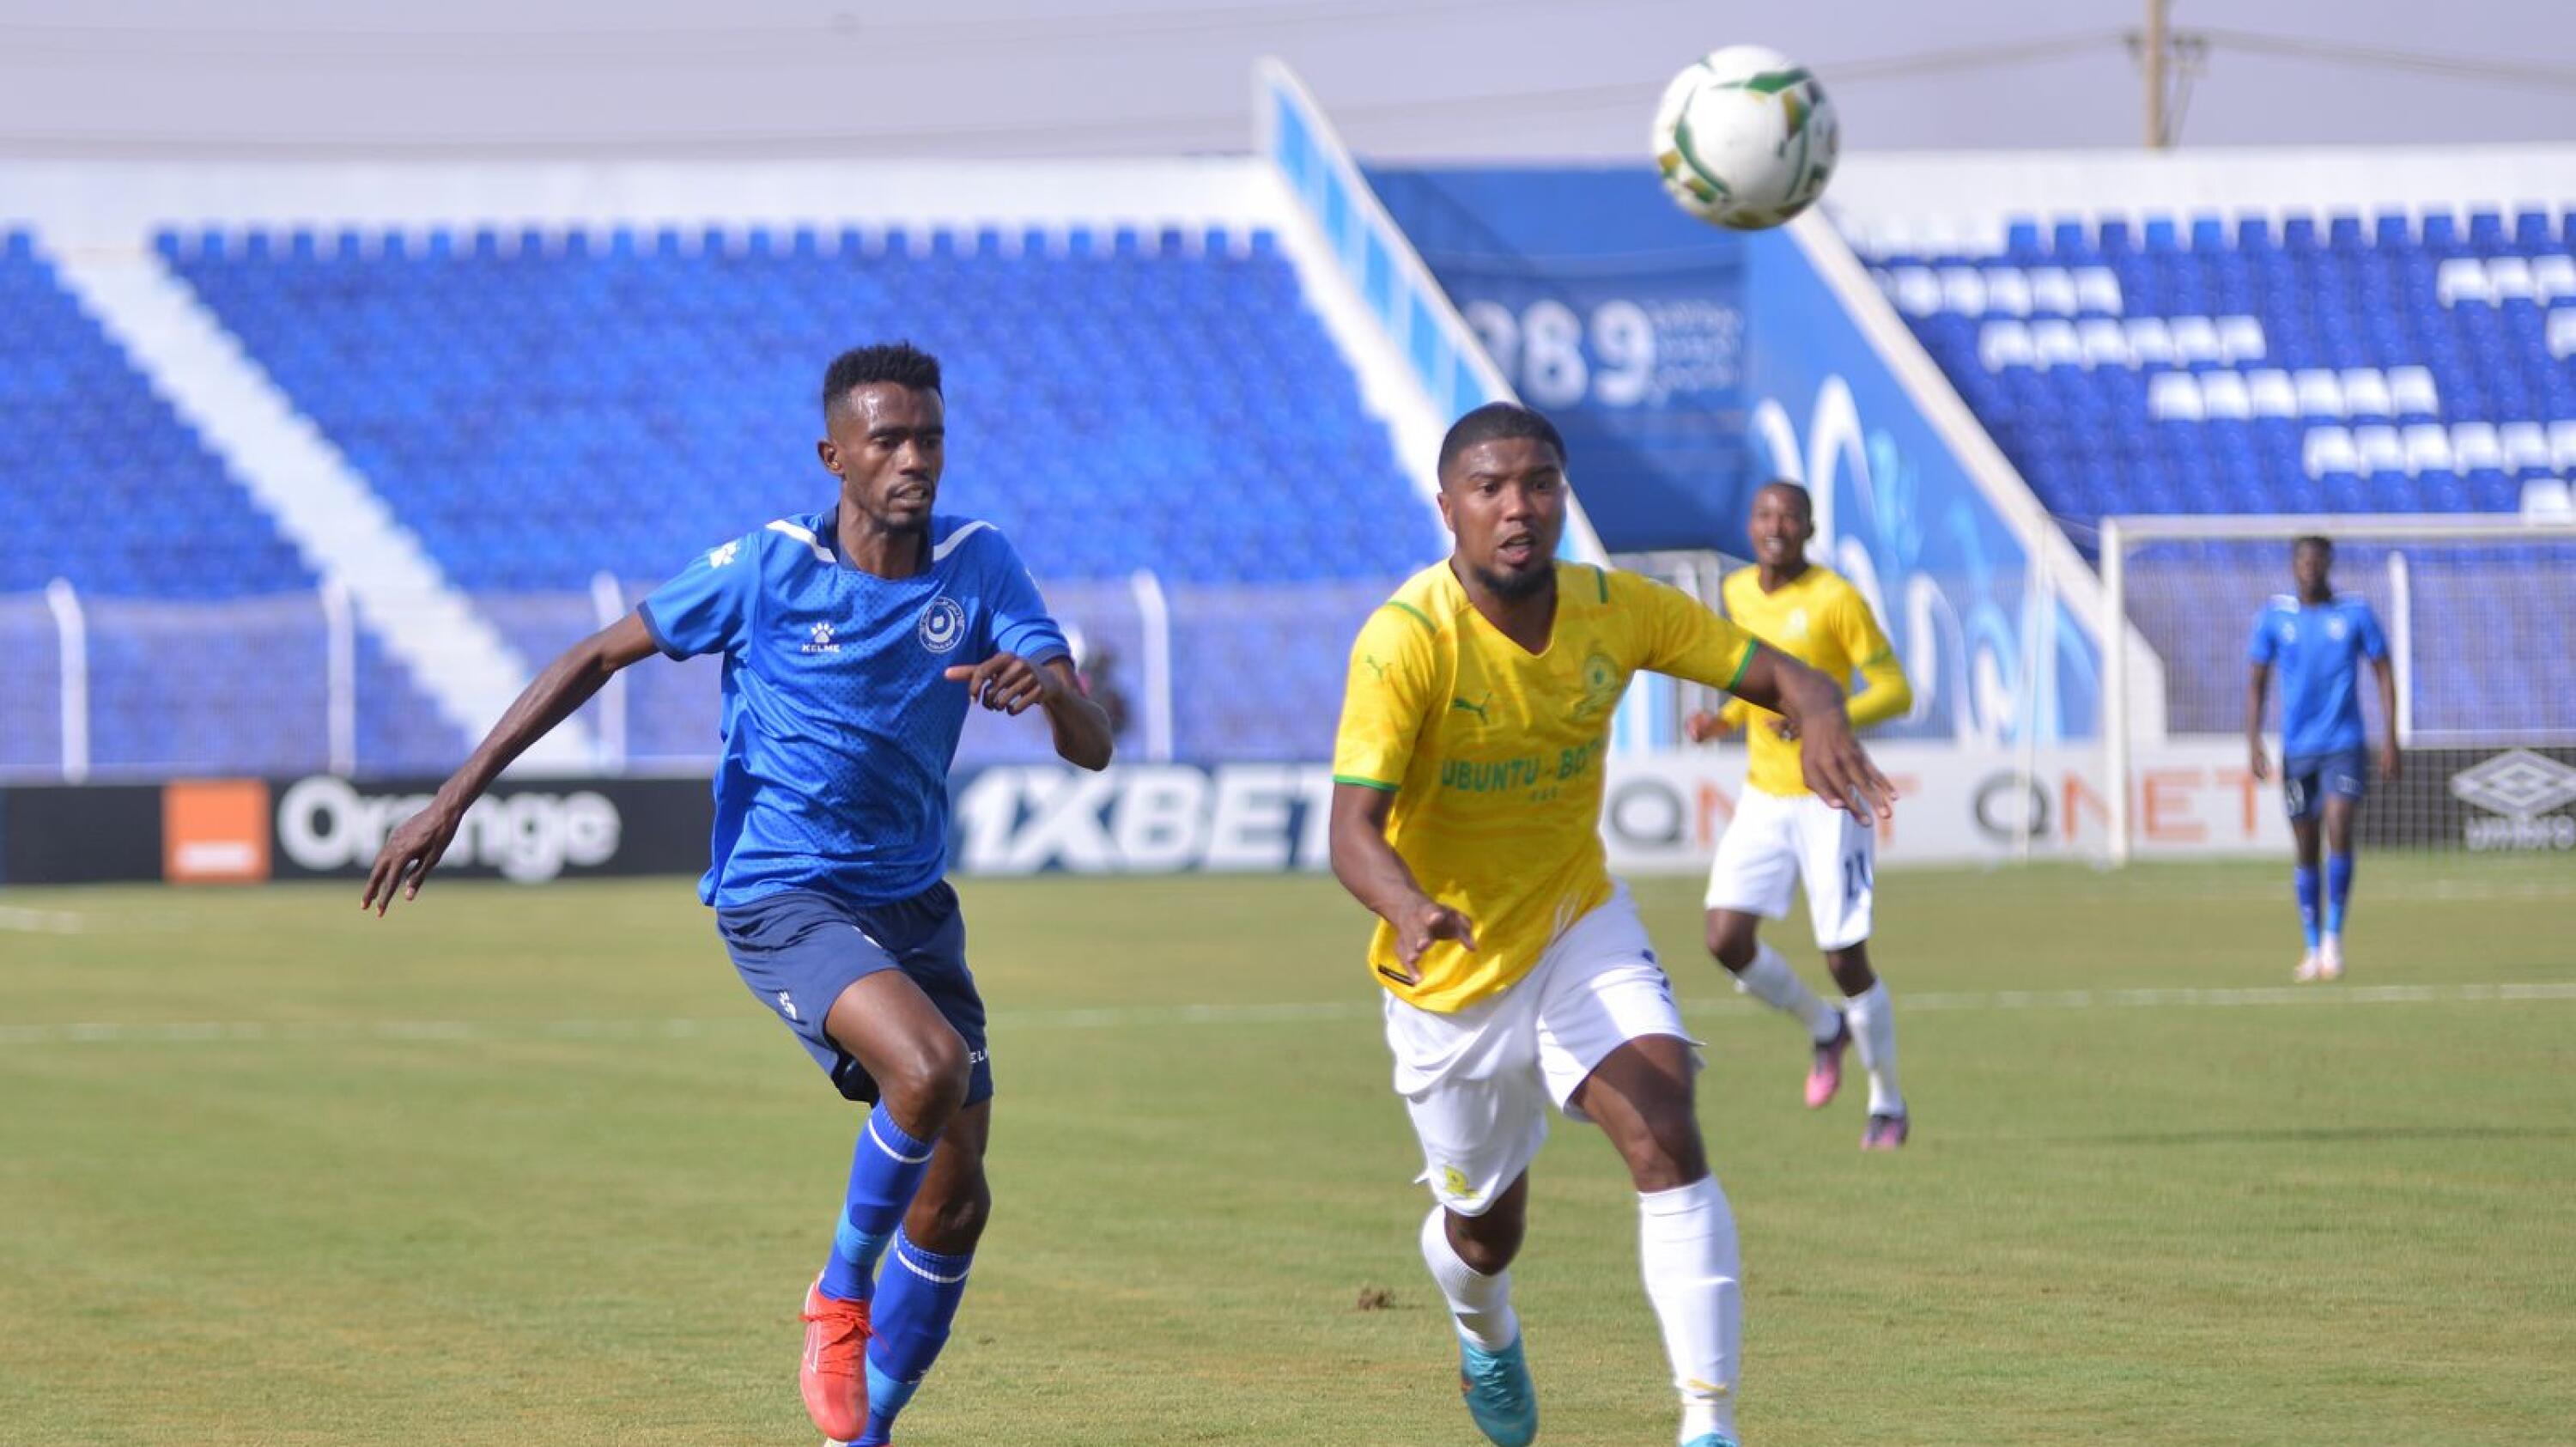 Yasir Mozamil Mohamed of Al Hilal and Lyle Lakay of Mamelodi Sundowns fight for possession during their CAF Champions League match at the Al-Hilal Stadium in Omdurman, Sudan on Saturday